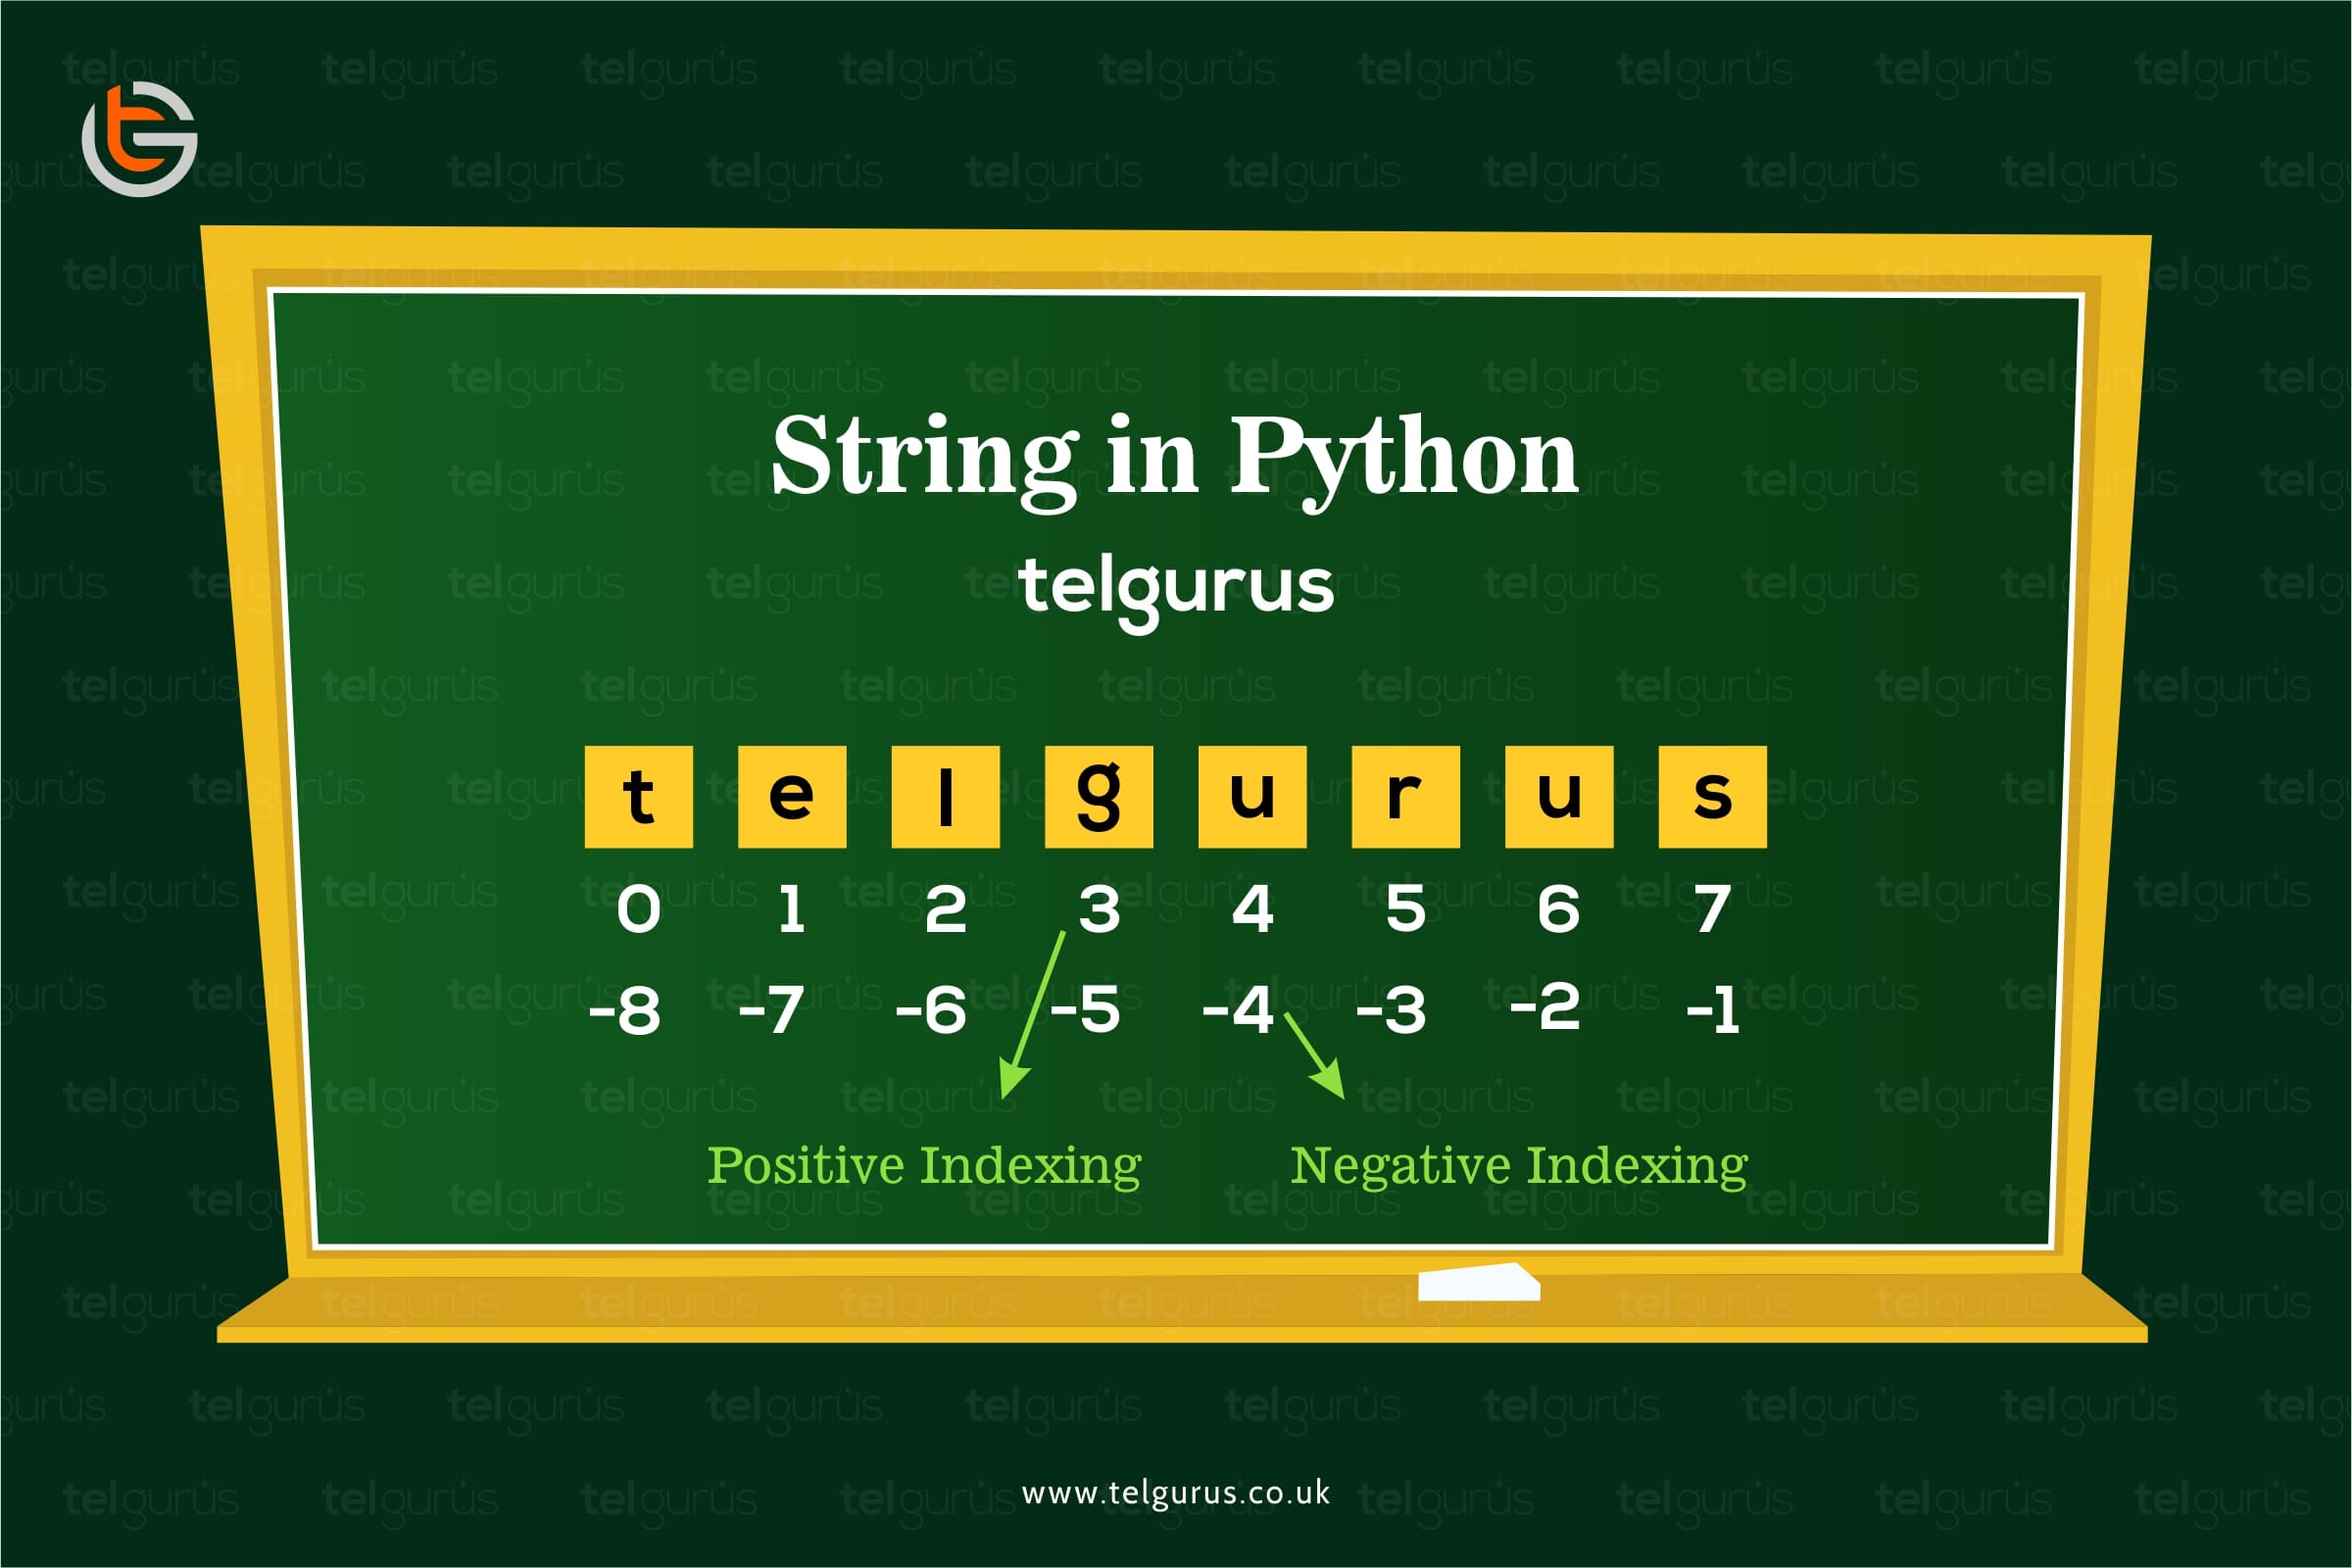 What are strings in python?